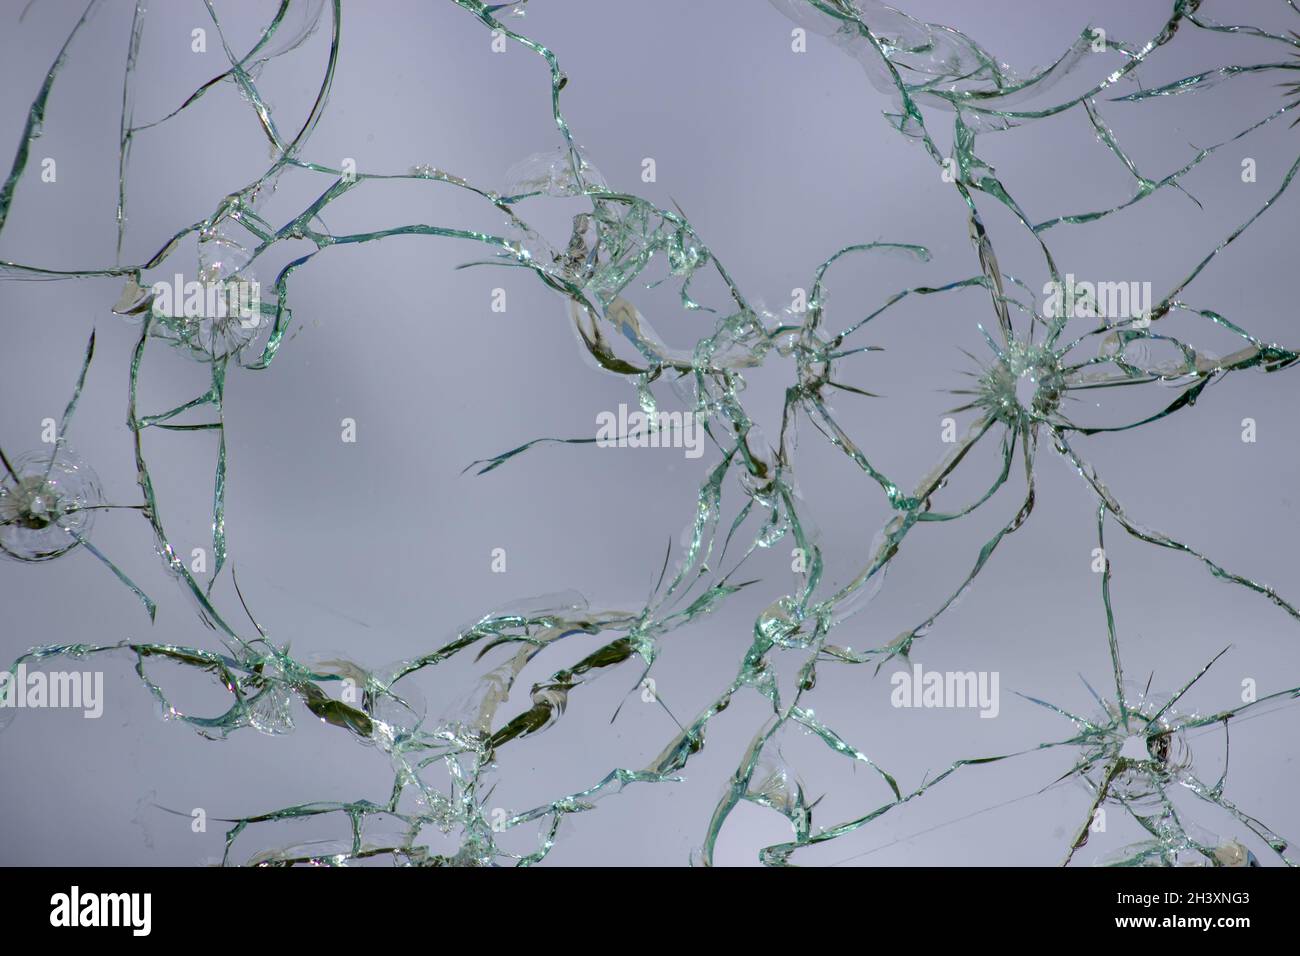 Cracked glass, texture of broken shots of glass on a white background. Stock Photo